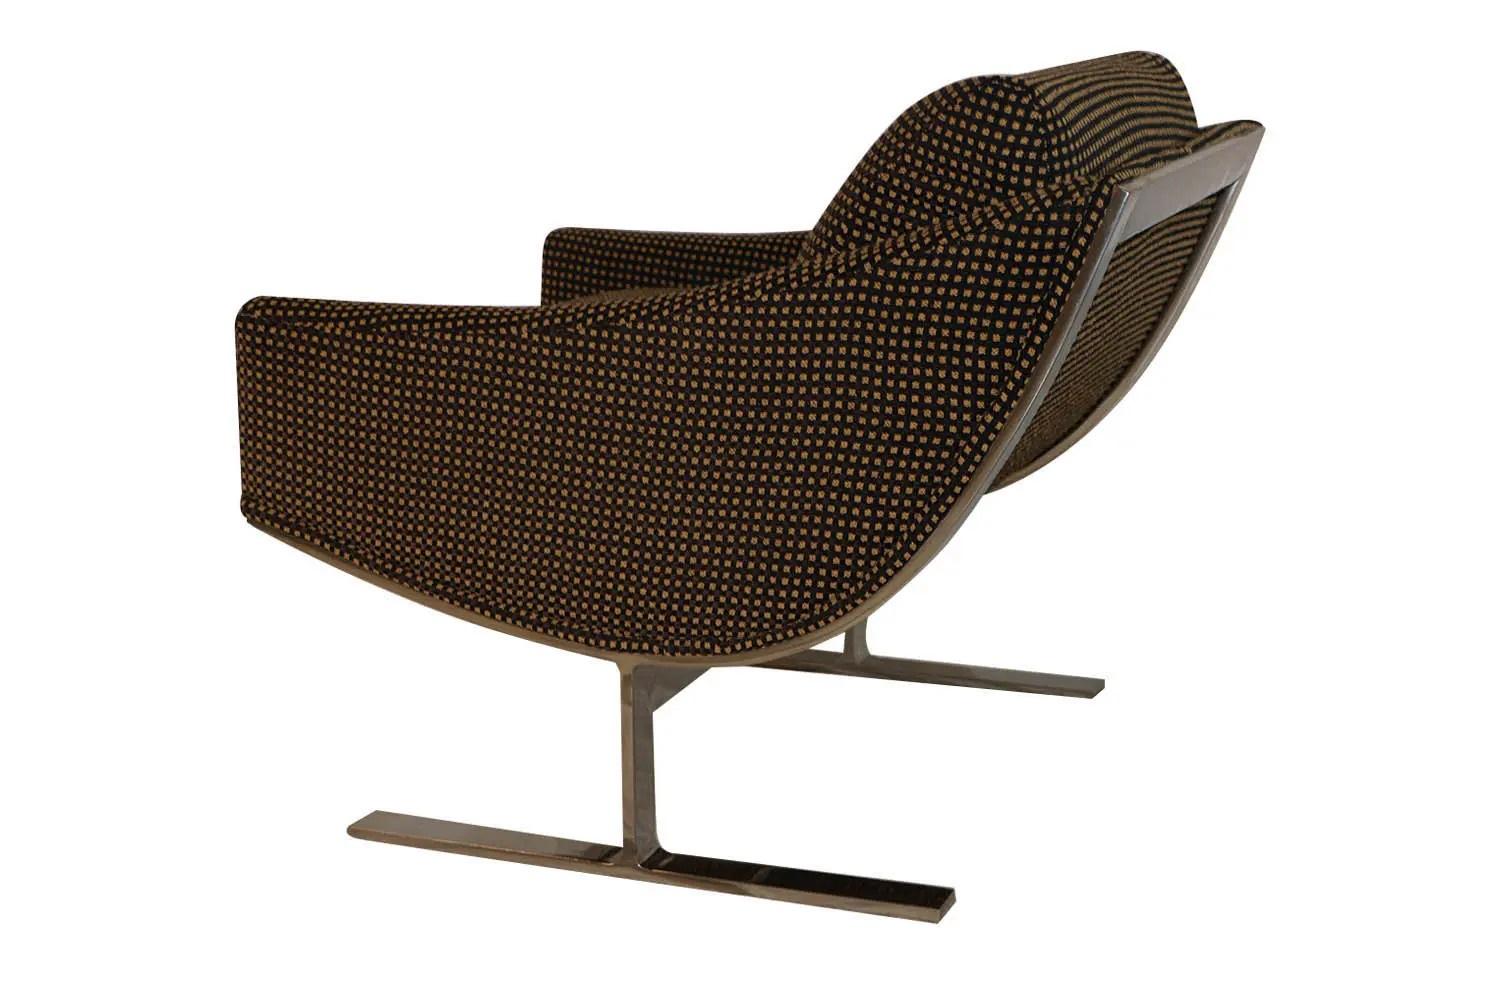 American Mid Century Kipp Stewart “Arc Lounge Chairs” for Directional For Sale